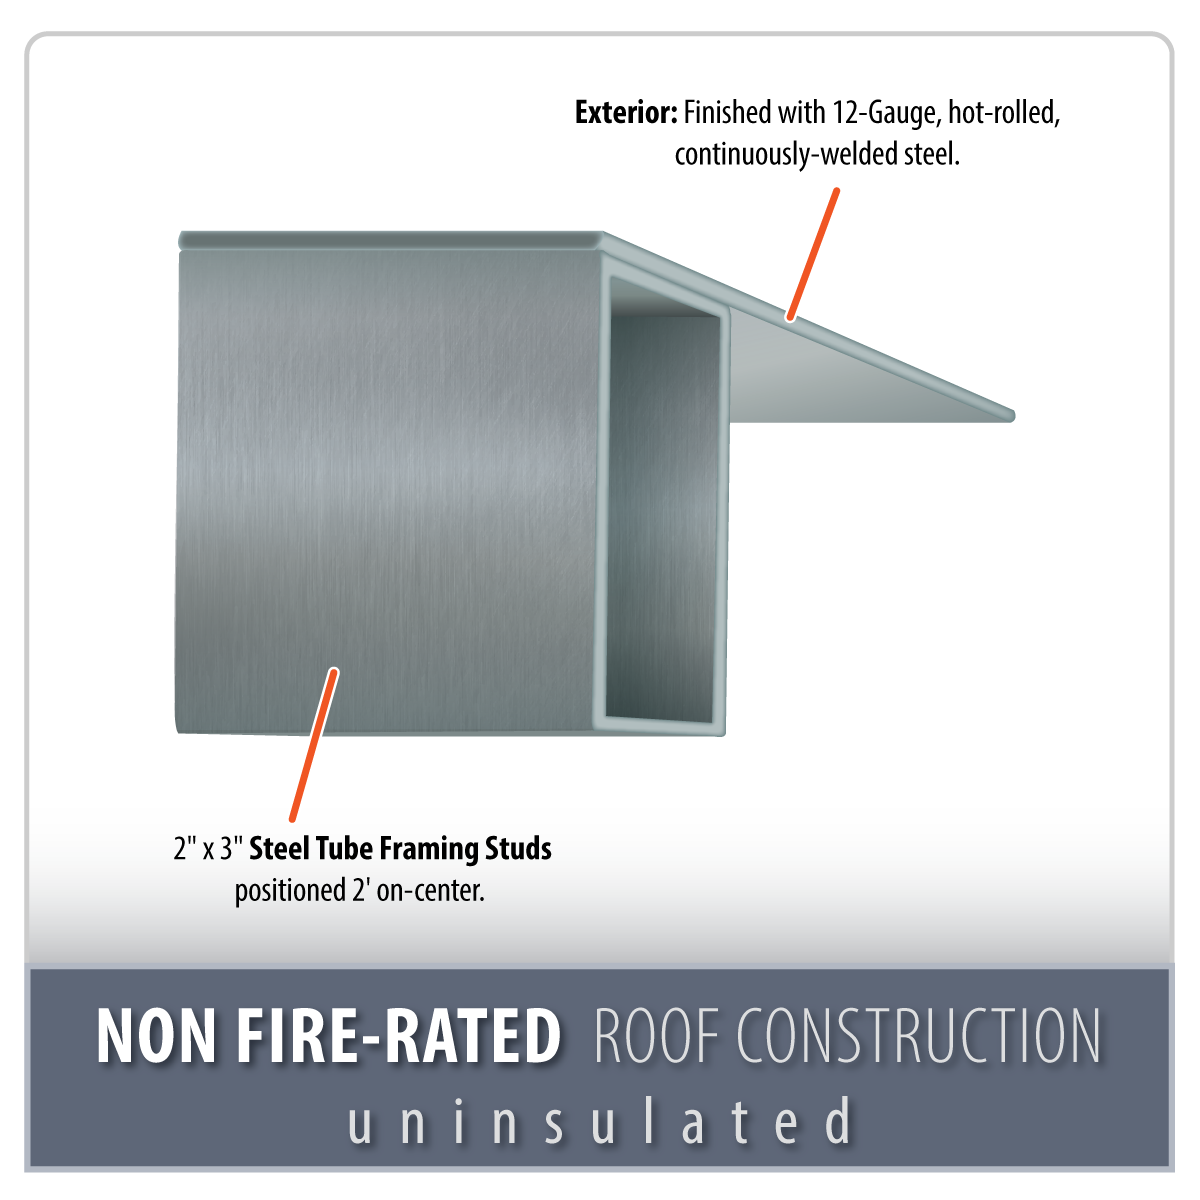 Non Fire-Rated Uninsulated Roof Construction Feature